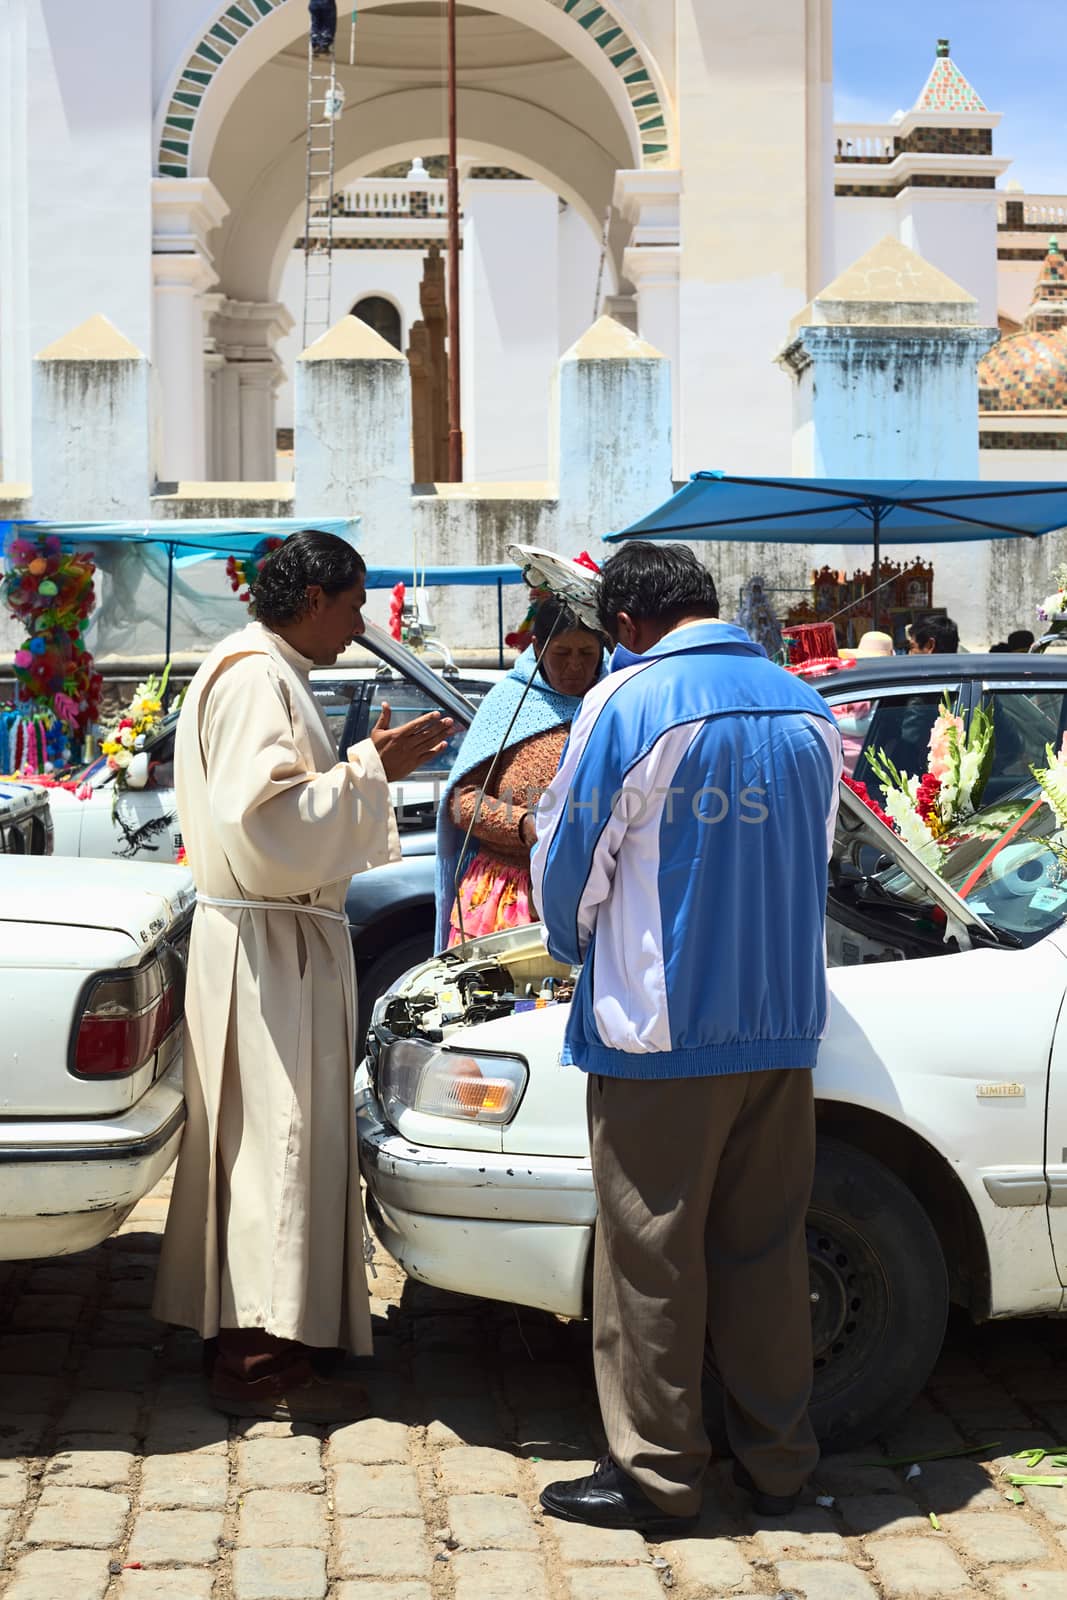 COPACABANA, BOLIVIA - OCTOBER 20, 2014: Priest saying a prayer in front of the open hood of a car at the blessing of vehicles on 6 de Agosto avenue outside the basilica in the small tourist town on October 20, 2014 in Copacabana, Bolivia. 